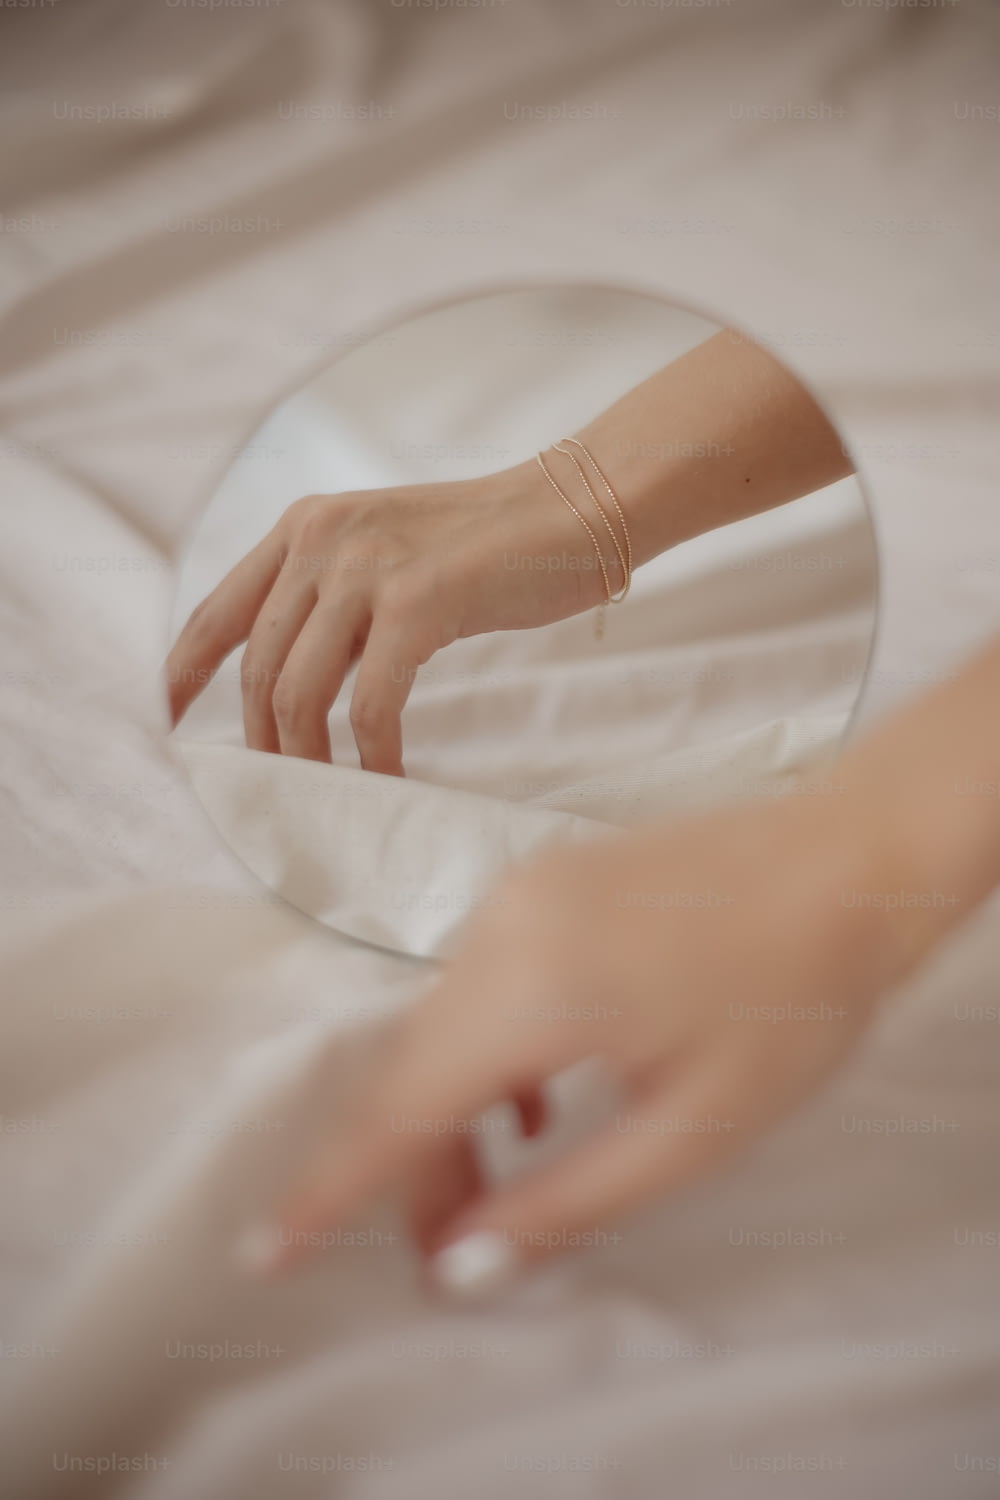 a person's hand touching a mirror on a bed